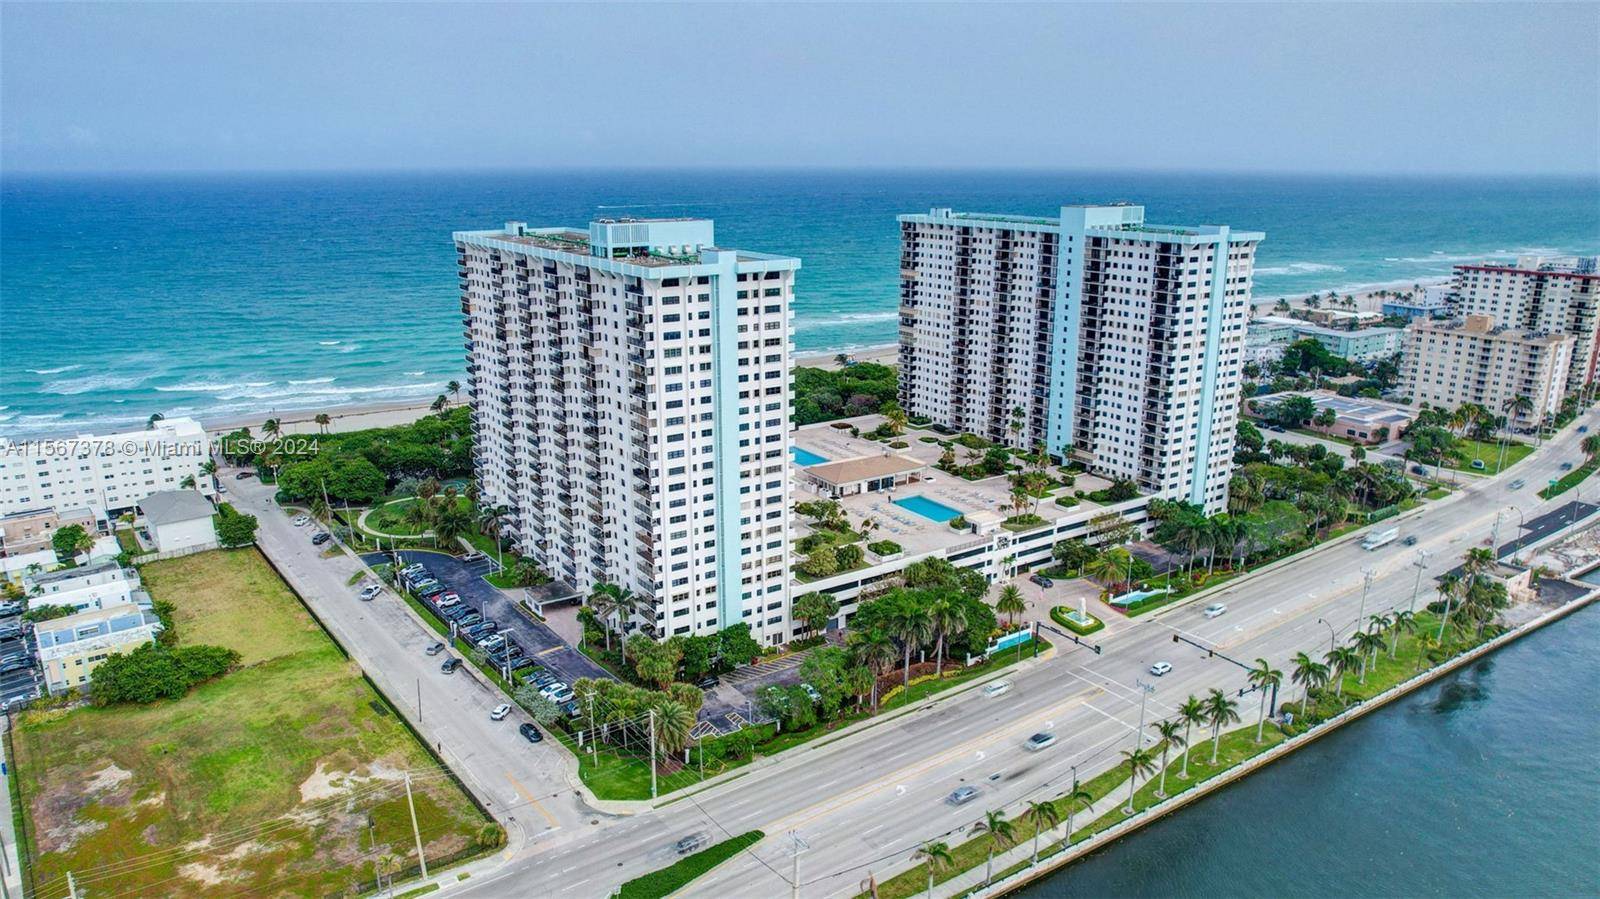 Indulge in oceanfront living with direct beach access panoramic intracoastal views.